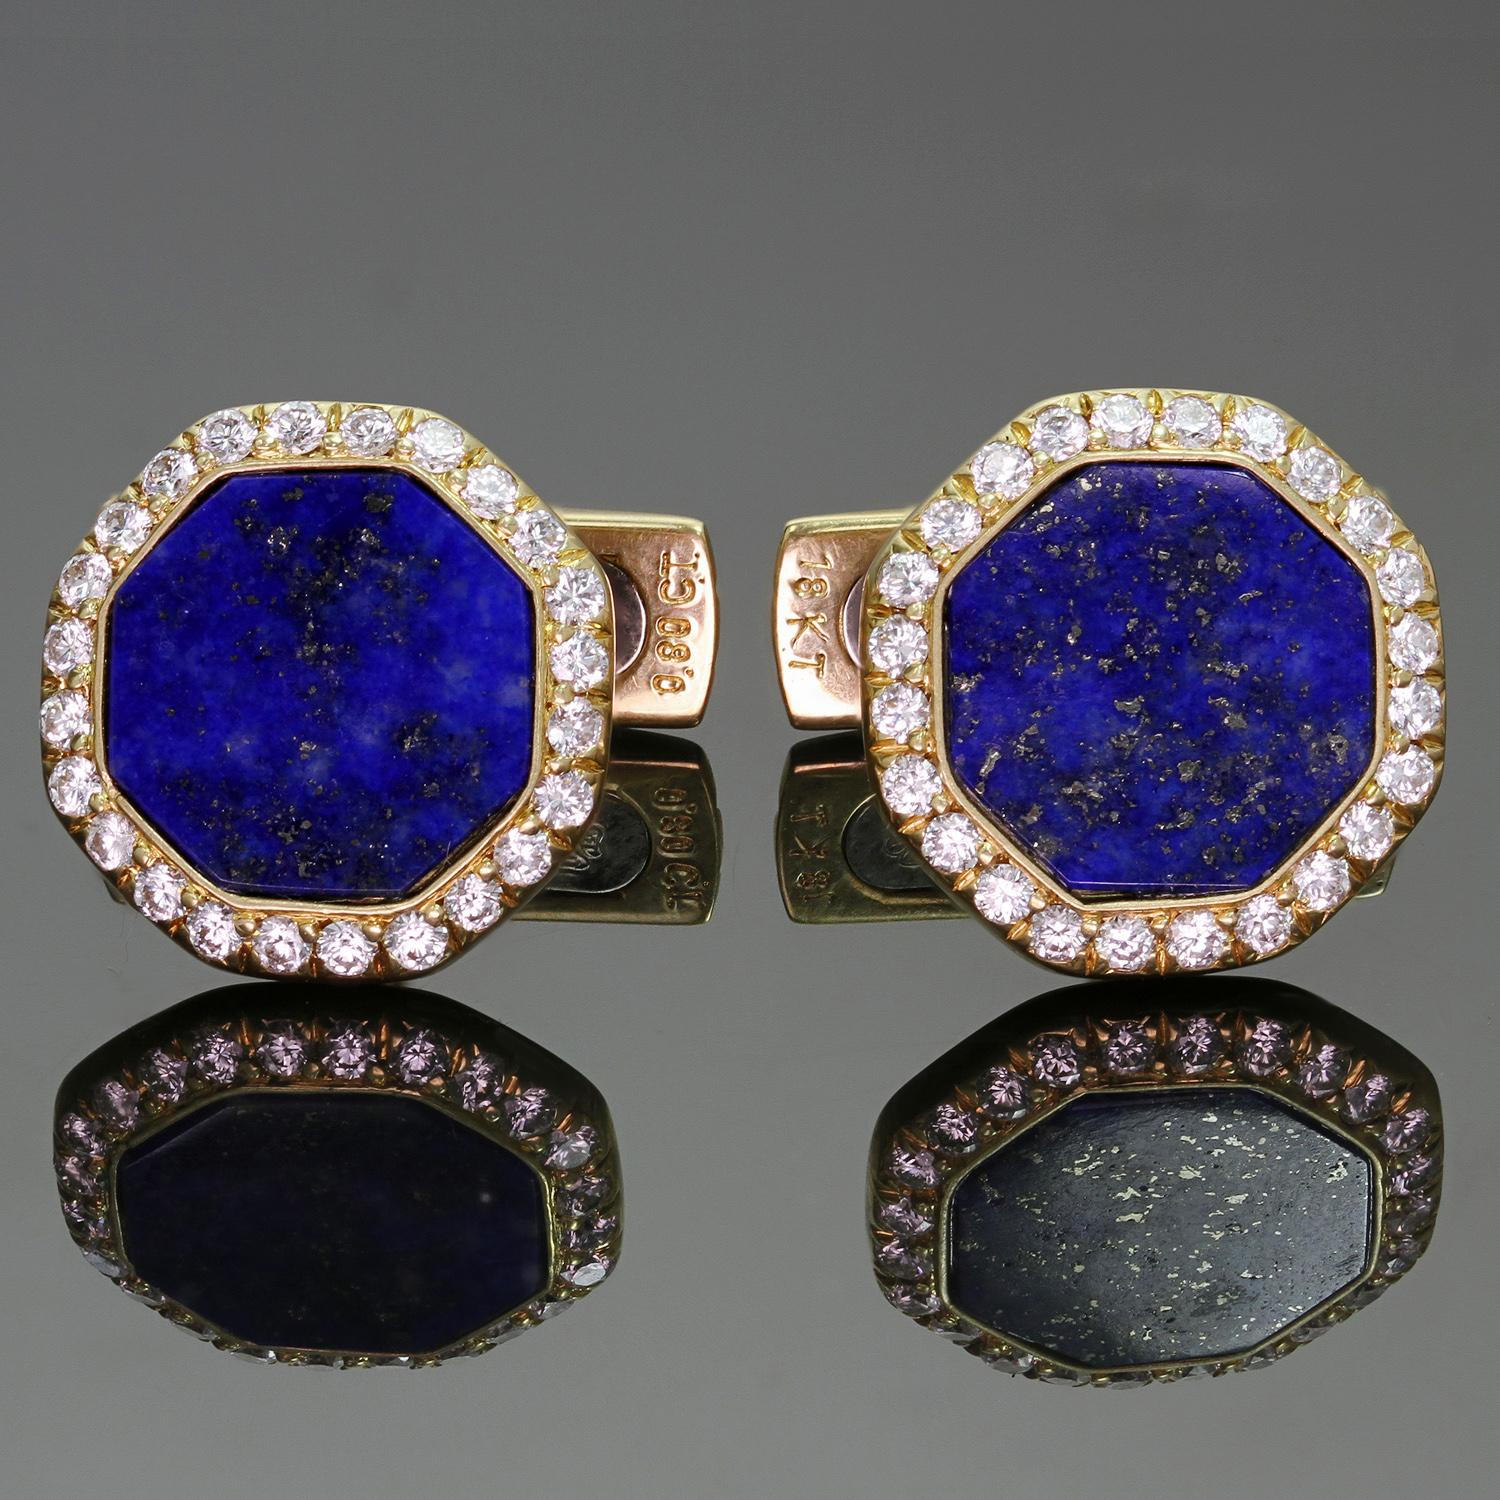 These stunning Van Cleef & Arpels cufflinks features an octagonal shape crafted in 18k yellow gold and set with octagon-shaped lapis lazuli gemstones surrounded by brilliant-cut round D-E-F VVS1-VVS2 diamonds weighing an estimated 0.80 carats. Made